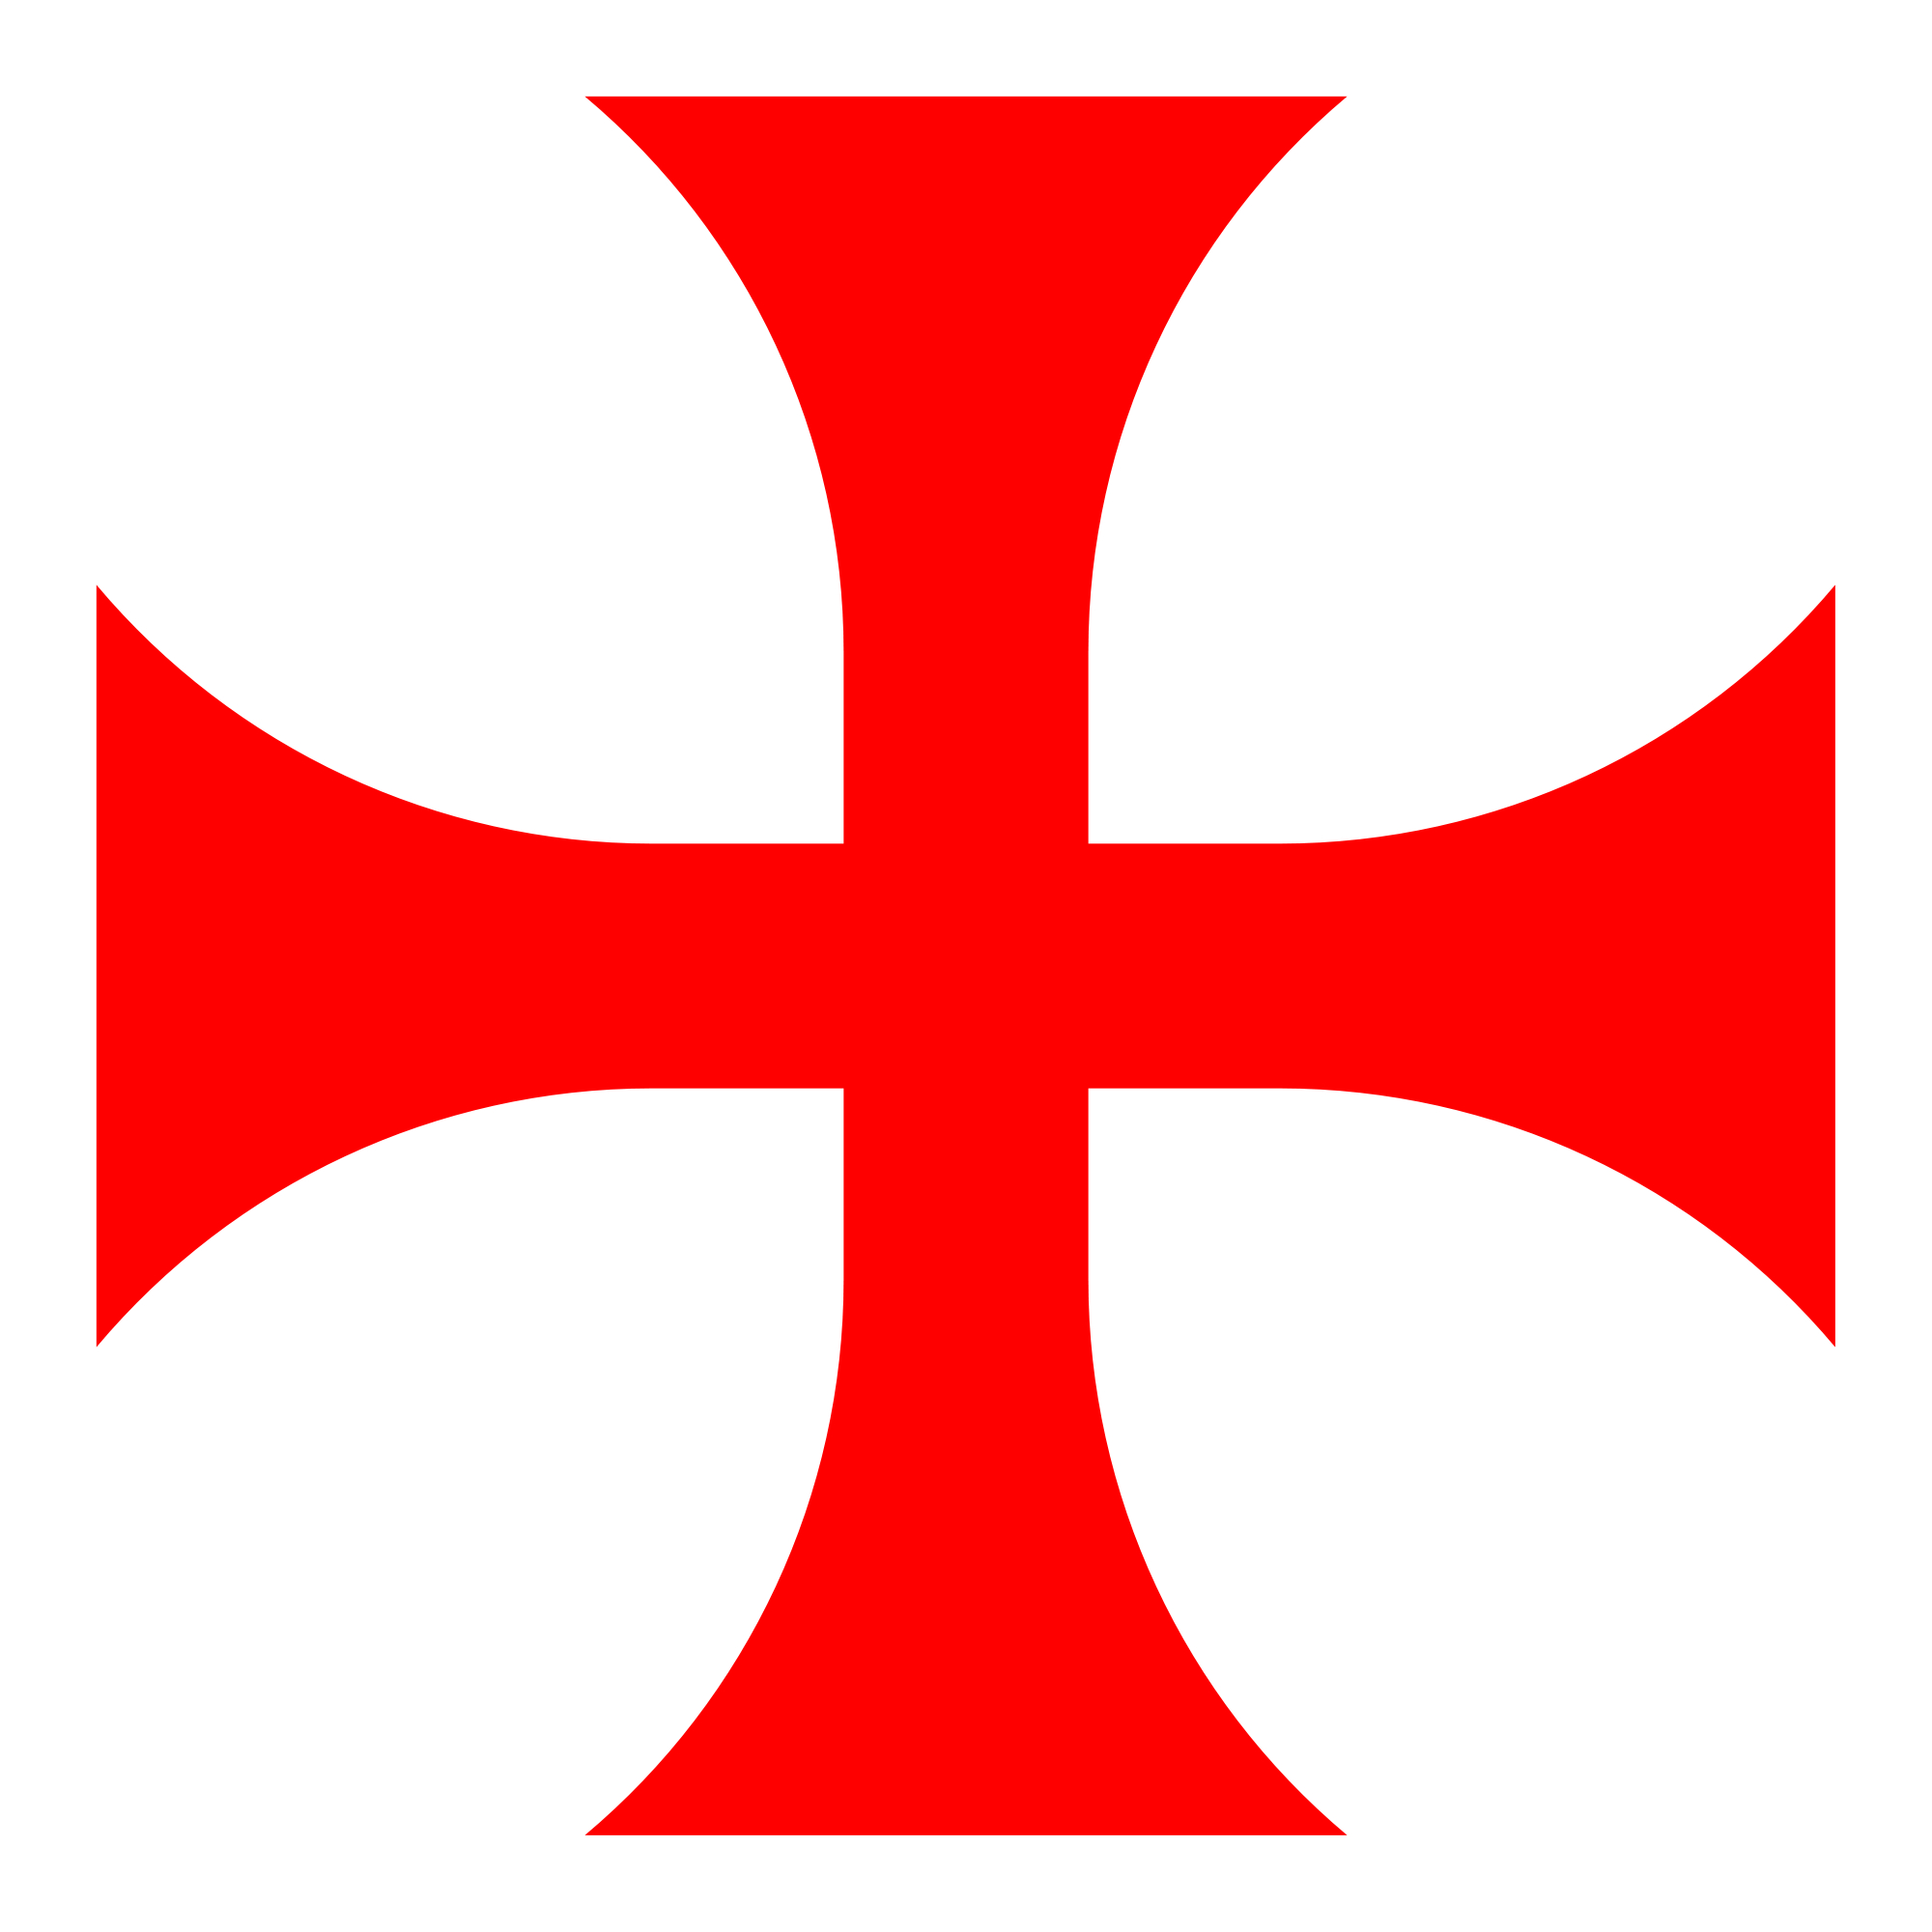 Red Cross Patte Tattoo Designs Cross Symbol Knights Templar throughout sizing 2000 X 2000